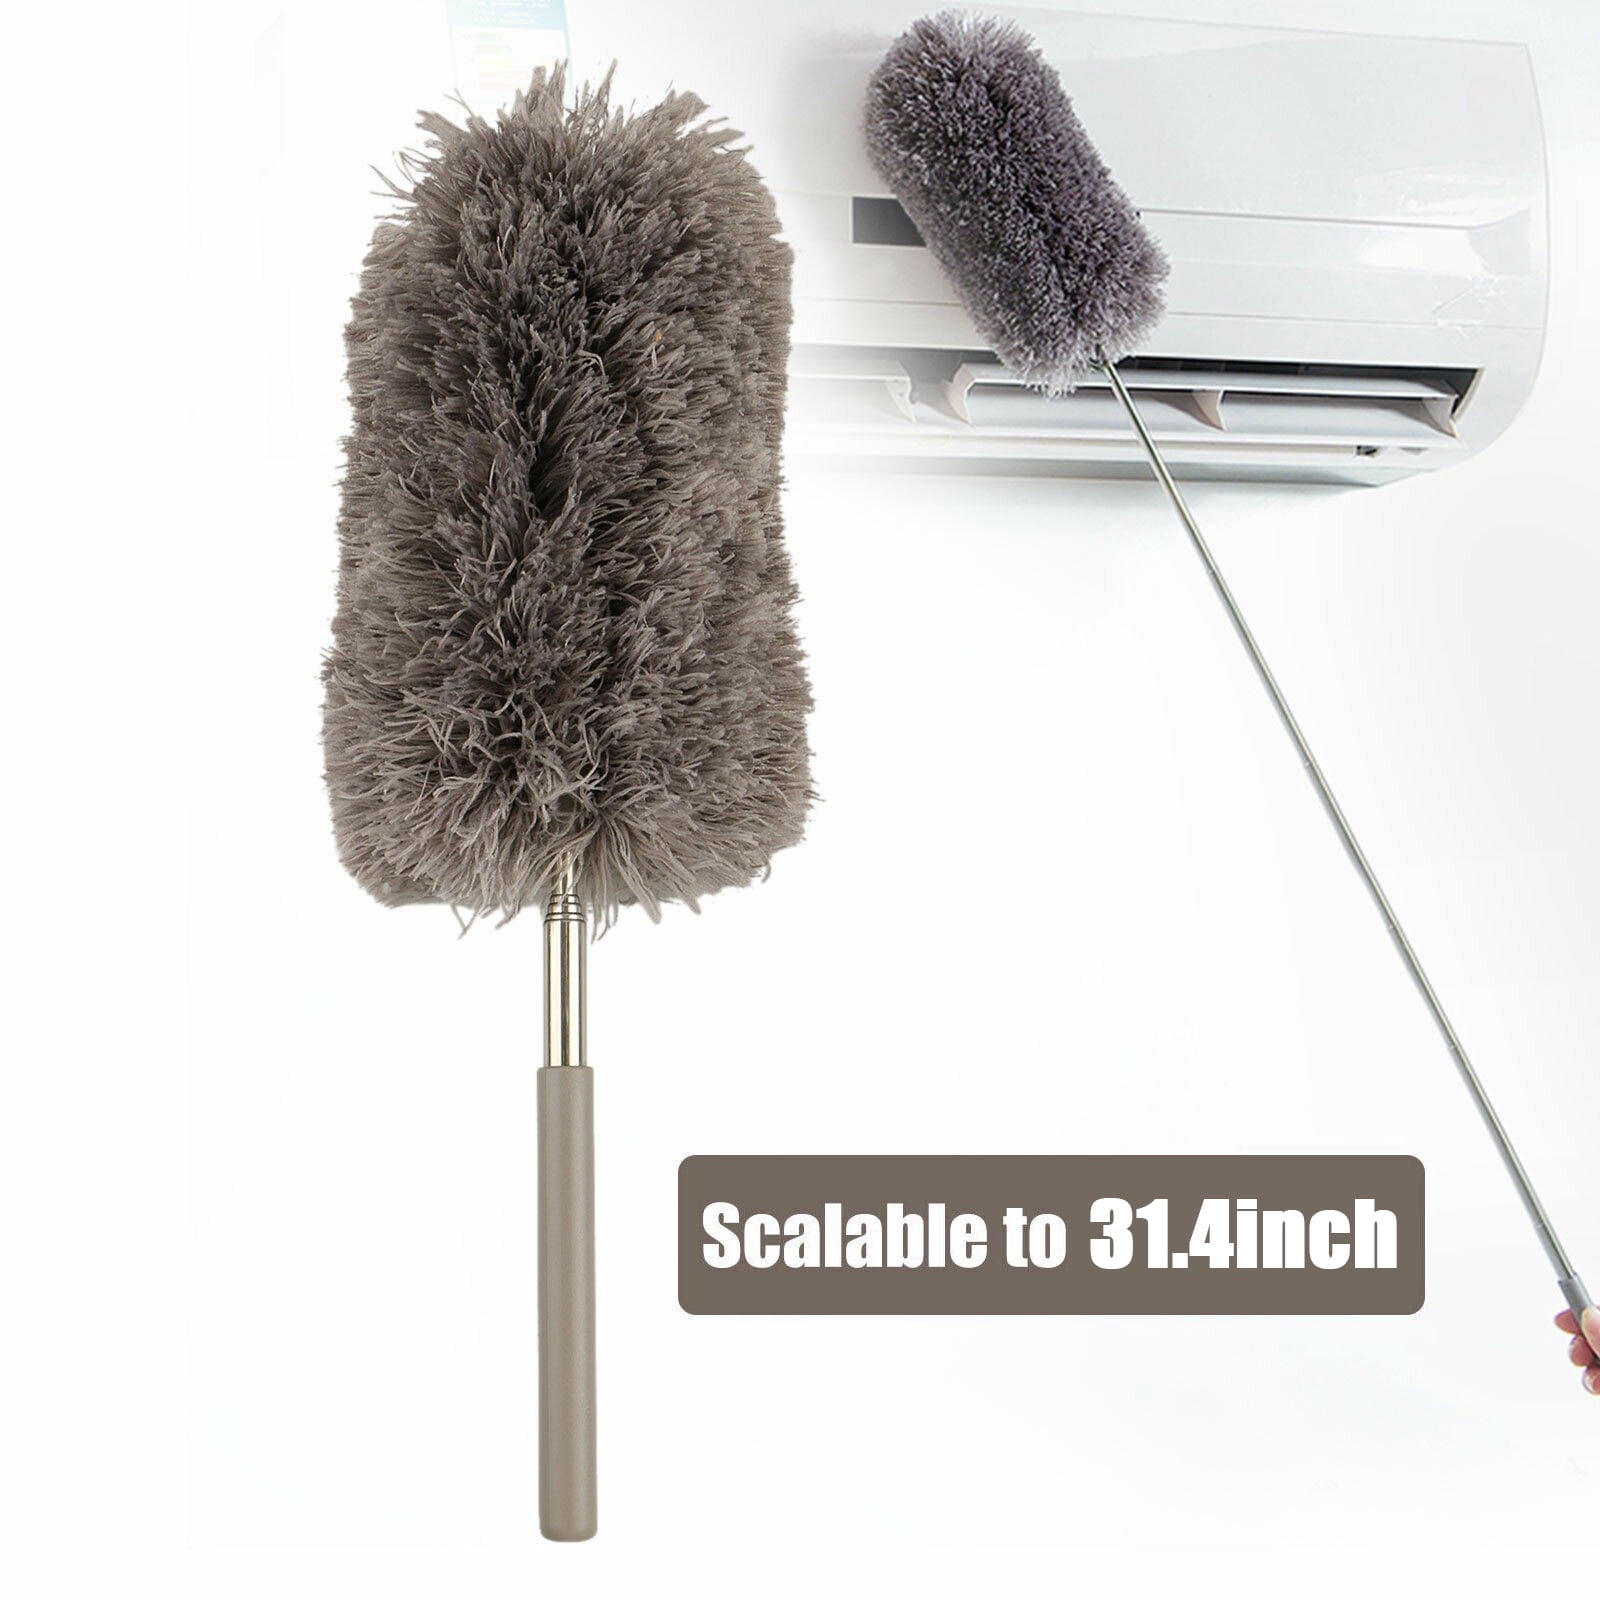 Cleaning Soft Feather Microfiber Adjustable Household Duster Dusting Brush Tool 